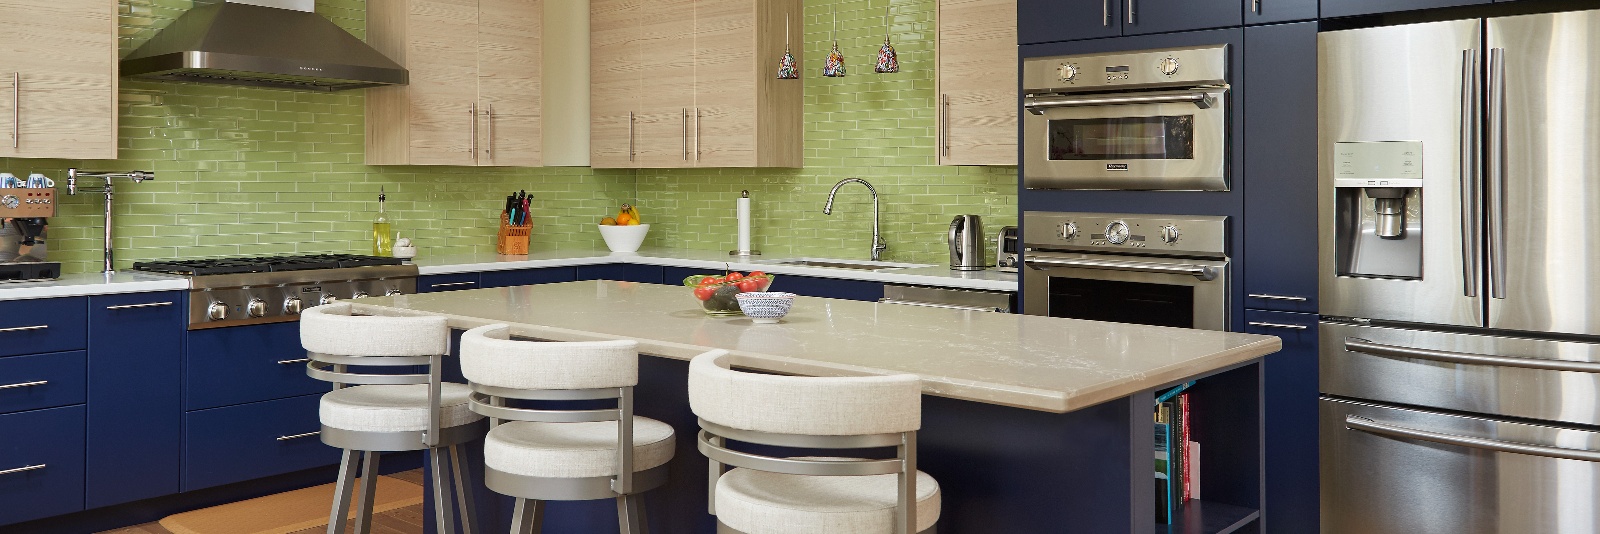 colorful kitchen renovation with green blacksplash and navy blue cabinetry in markham ontario-1